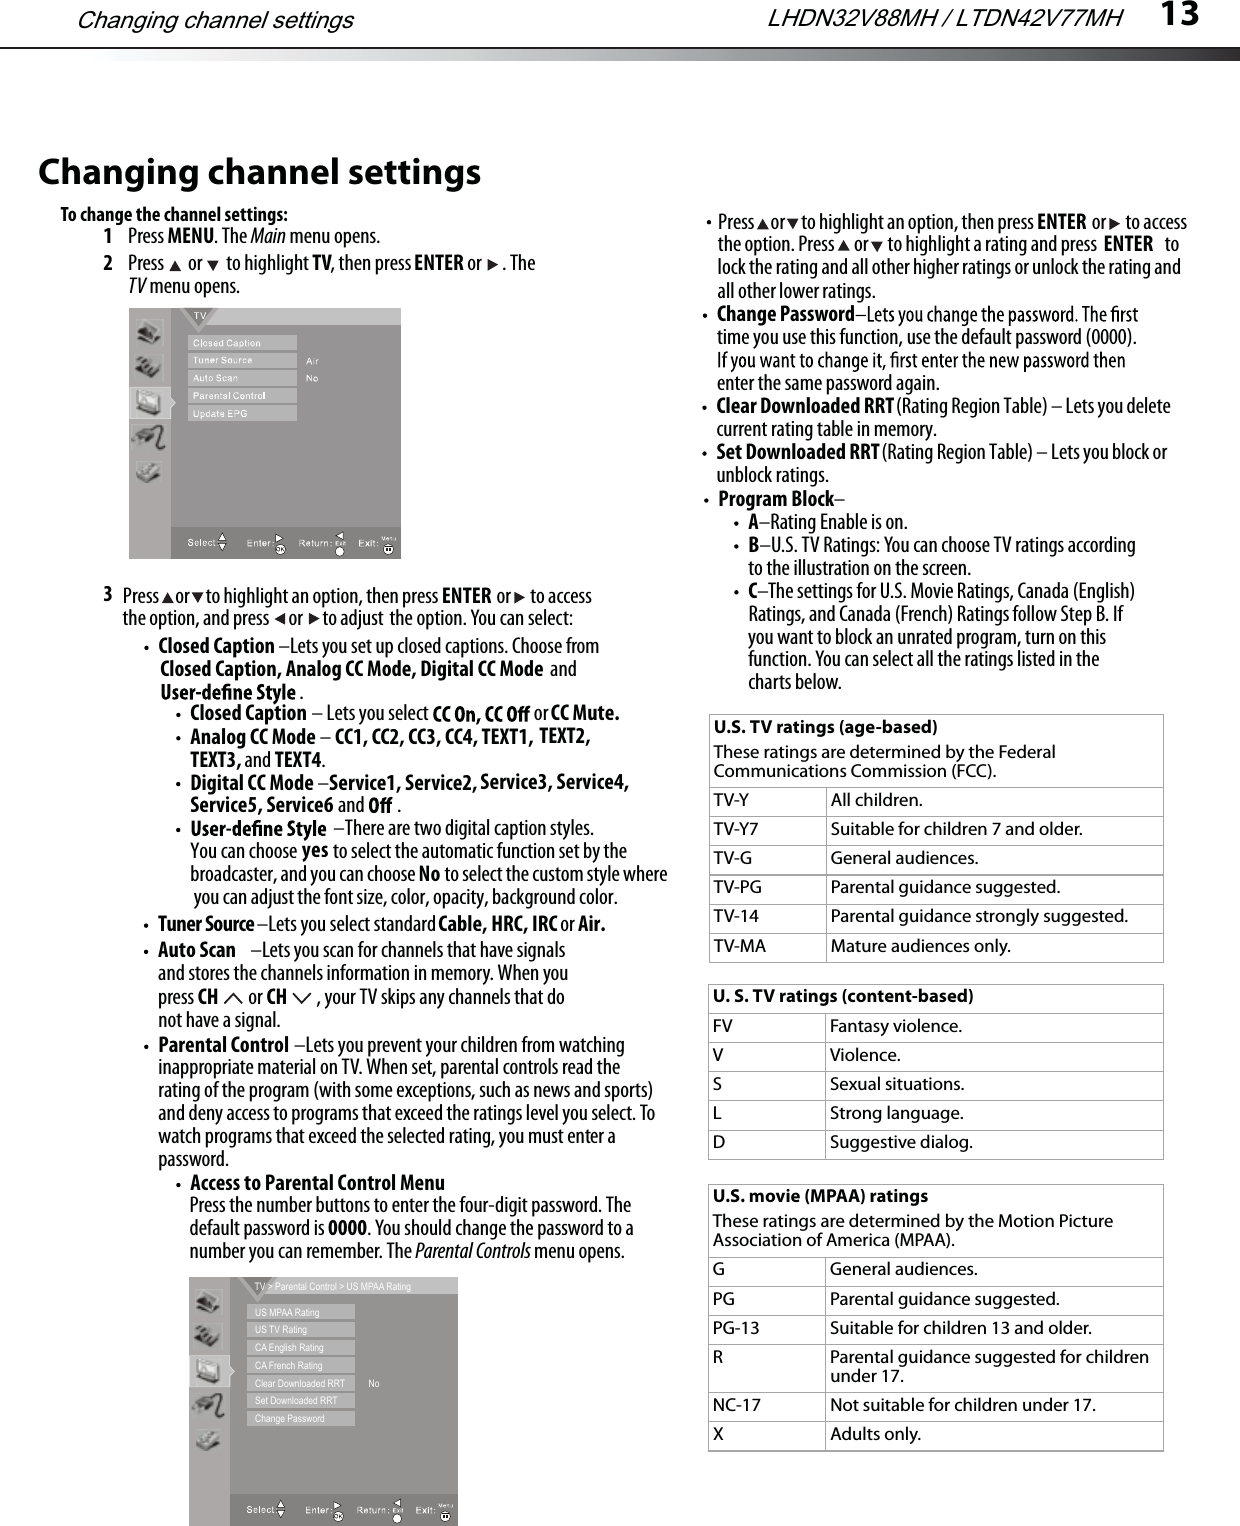 13Changing channel settingsTo change the channel settings:1Press MENU. The Main menu opens.2Press   or   to highlight TV, then press ENTER or  . The TV menu opens.3Tuner Source –Lets you select standard Cable,  orHRC, IRCAuto Scan –Lets you scan for channels that have signals and stores the channels information in memory. When you press CH  or CH , your TV skips any channels that do not have a signal.inappropriate material on TV. When set, parental controls read the rating of the program (with some exceptions, such as news and sports) and deny access to programs that exceed the ratings level you select. To watch programs that exceed the selected rating, you must enter a password.Press the number buttons to enter the four-digit password. The default password is 0000. You should change the password to a number you can remember. The Parental Controls menu opens.Change Passwordtime you use this function, use the default password (0000). enter the same password again.Program Block– A–Rating Enable is on.B–U.S. TV Ratings: You can choose TV ratings according to the illustration on the screen.C–The settings for U.S. Movie Ratings, Canada (English) Ratings, and Canada (French) Ratings follow Step B. If you want to block an unrated program, turn on this function. You can select all the ratings listed in the charts below.MTS/SAPU.S. TV ratings (age-based)These ratings are determined by the Federal Communications Commission (FCC).TV-Y All children.TV-Y7 Suitable for children 7 and older.TV-G General audiences.TV-PG Parental guidance suggested.TV-14 Parental guidance strongly suggested.TV-MA Mature audiences only.U. S. TV ratings (content-based)FV Fantasy violence.V Violence.S Sexual situations.L Strong language.D Suggestive dialog.U.S. movie (MPAA) ratingsThese ratings are determined by the Motion Picture Association of America (MPAA).G General audiences.PG Parental guidance suggested.PG-13 Suitable for children 13 and older.R Parental guidance suggested for children under 17.NC-17 Not suitable for children under 17.X Adults only.Press     or     to highlight an option, then press                  or      to accessthe option, and press      or      to adjust the option. You can select:ENTERAir. Closed Caption –Lets you set up closed captions. Choose from Closed Caption, Analog CC Mode, Digital CC Mode and .TEXT3, and TEXT4.Digital CC Mode –Service1, Service2, Service5, Service6 and  .–There are two digital caption styles. You can choose          to select the automatic function set by the broadcaster, and you can choose         to select the custom style where you can adjust the font size, color, opacity, background color.Service3, Service4,yesNoAnalog CC Mode –CC1, CC2, CC3, CC4, TEXT1, TEXT2, Closed Caption – Lets you select CC Mute. orParental Control –Lets you prevent your children from watching Access to Parental Control MenuPress     or     to highlight an option, then press                  or      to accessthe option. Press      or      to highlight a rating and press                     to ENTERENTERlock the rating and all other higher ratings or unlock the rating and all other lower ratings. Clear Downloaded RRTcurrent rating table in memory. (Rating Region Table) – Lets you delete Set Downloaded RRTunblock ratings. (Rating Region Table) – Lets you block orChanging channel settings LHDN32V88MH / LTDN42V77MHUS MPAA RatingUS TV RatingCA English RatingCA French RatingClear Downloaded RRTSet Downloaded RRTChange PasswordTV &gt; Parental Control &gt; US MPAA RatingNo